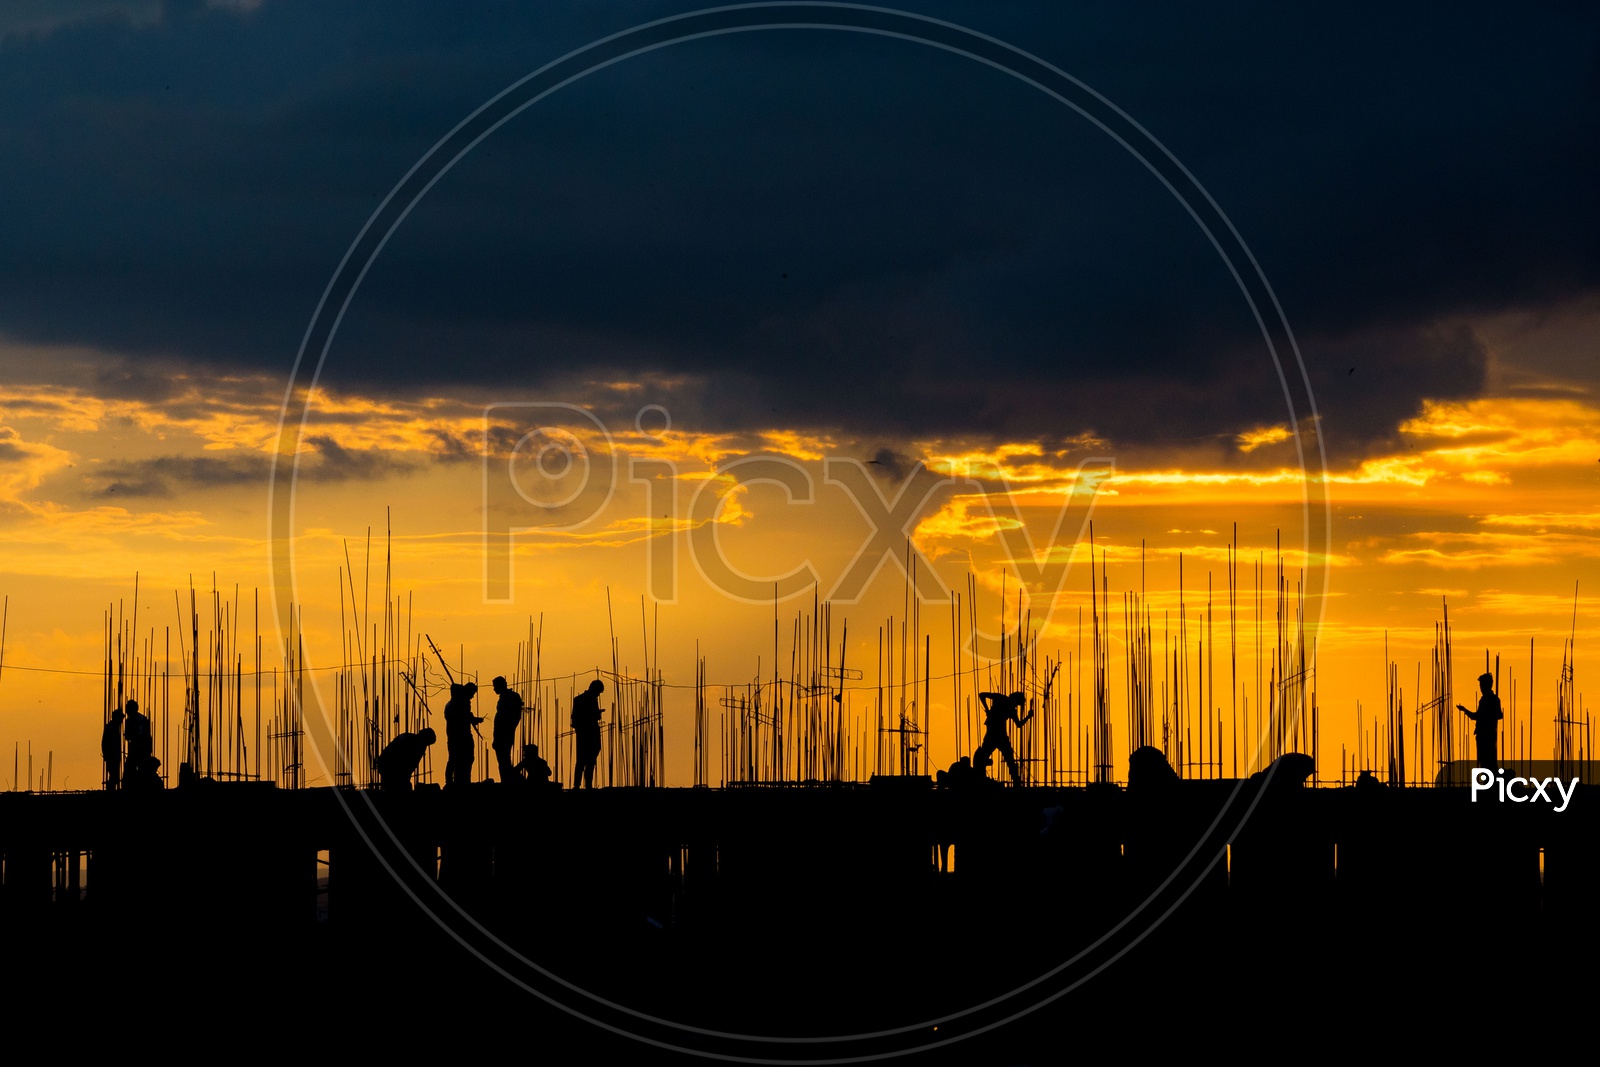 Silhouettes of A Construction Site With Workers On the Roof Top And with Golden Yellow Sky in Background